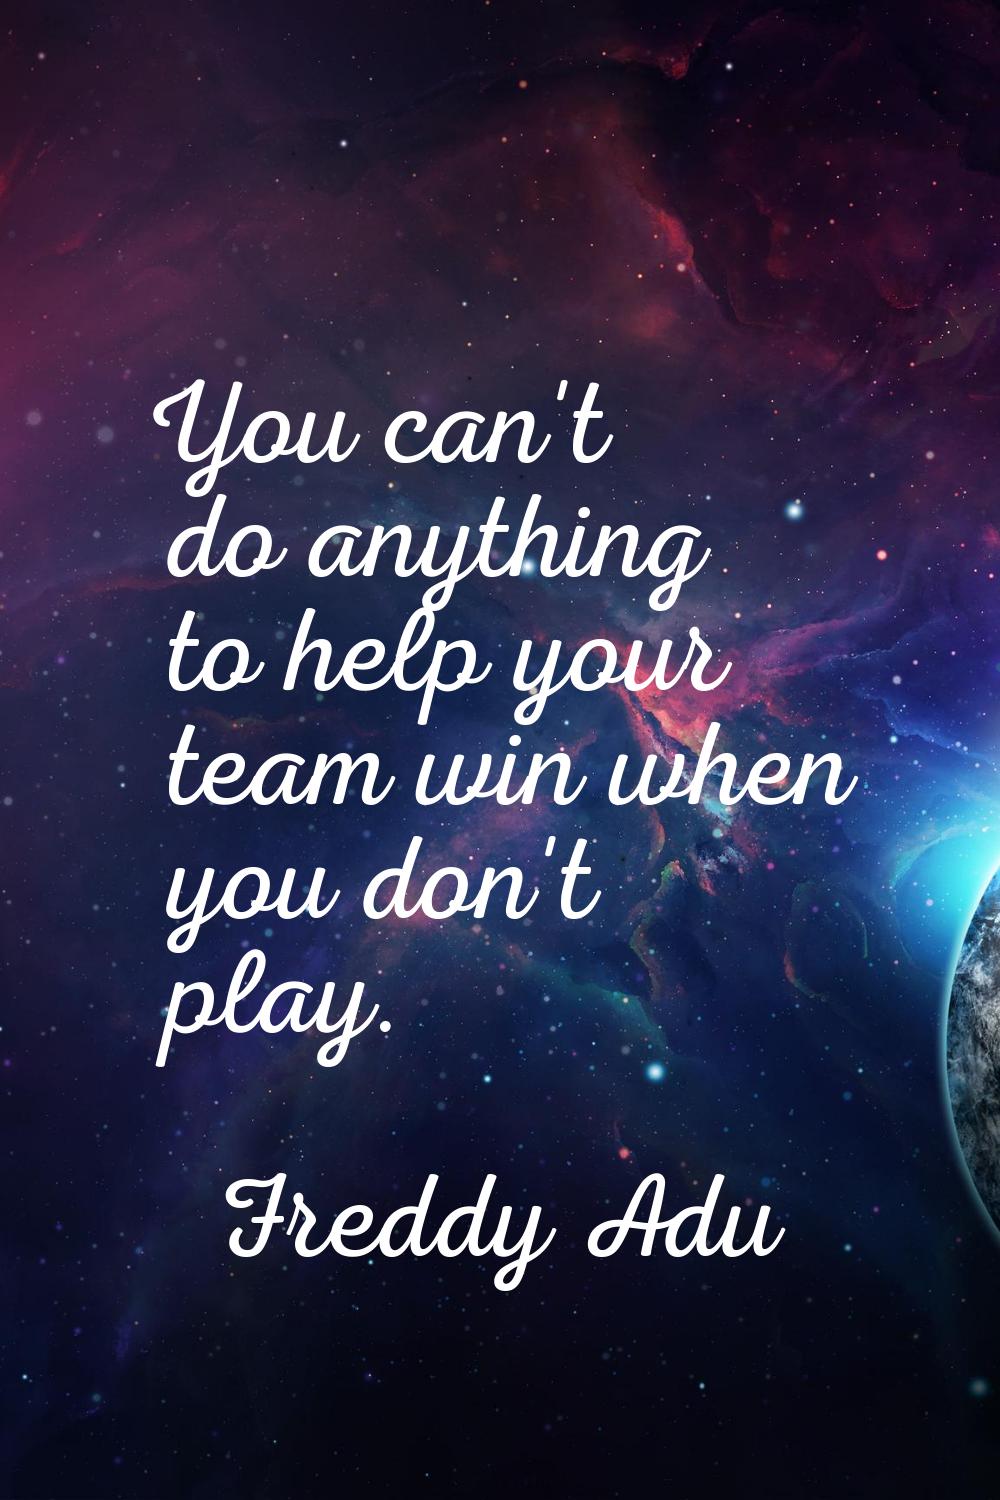 You can't do anything to help your team win when you don't play.